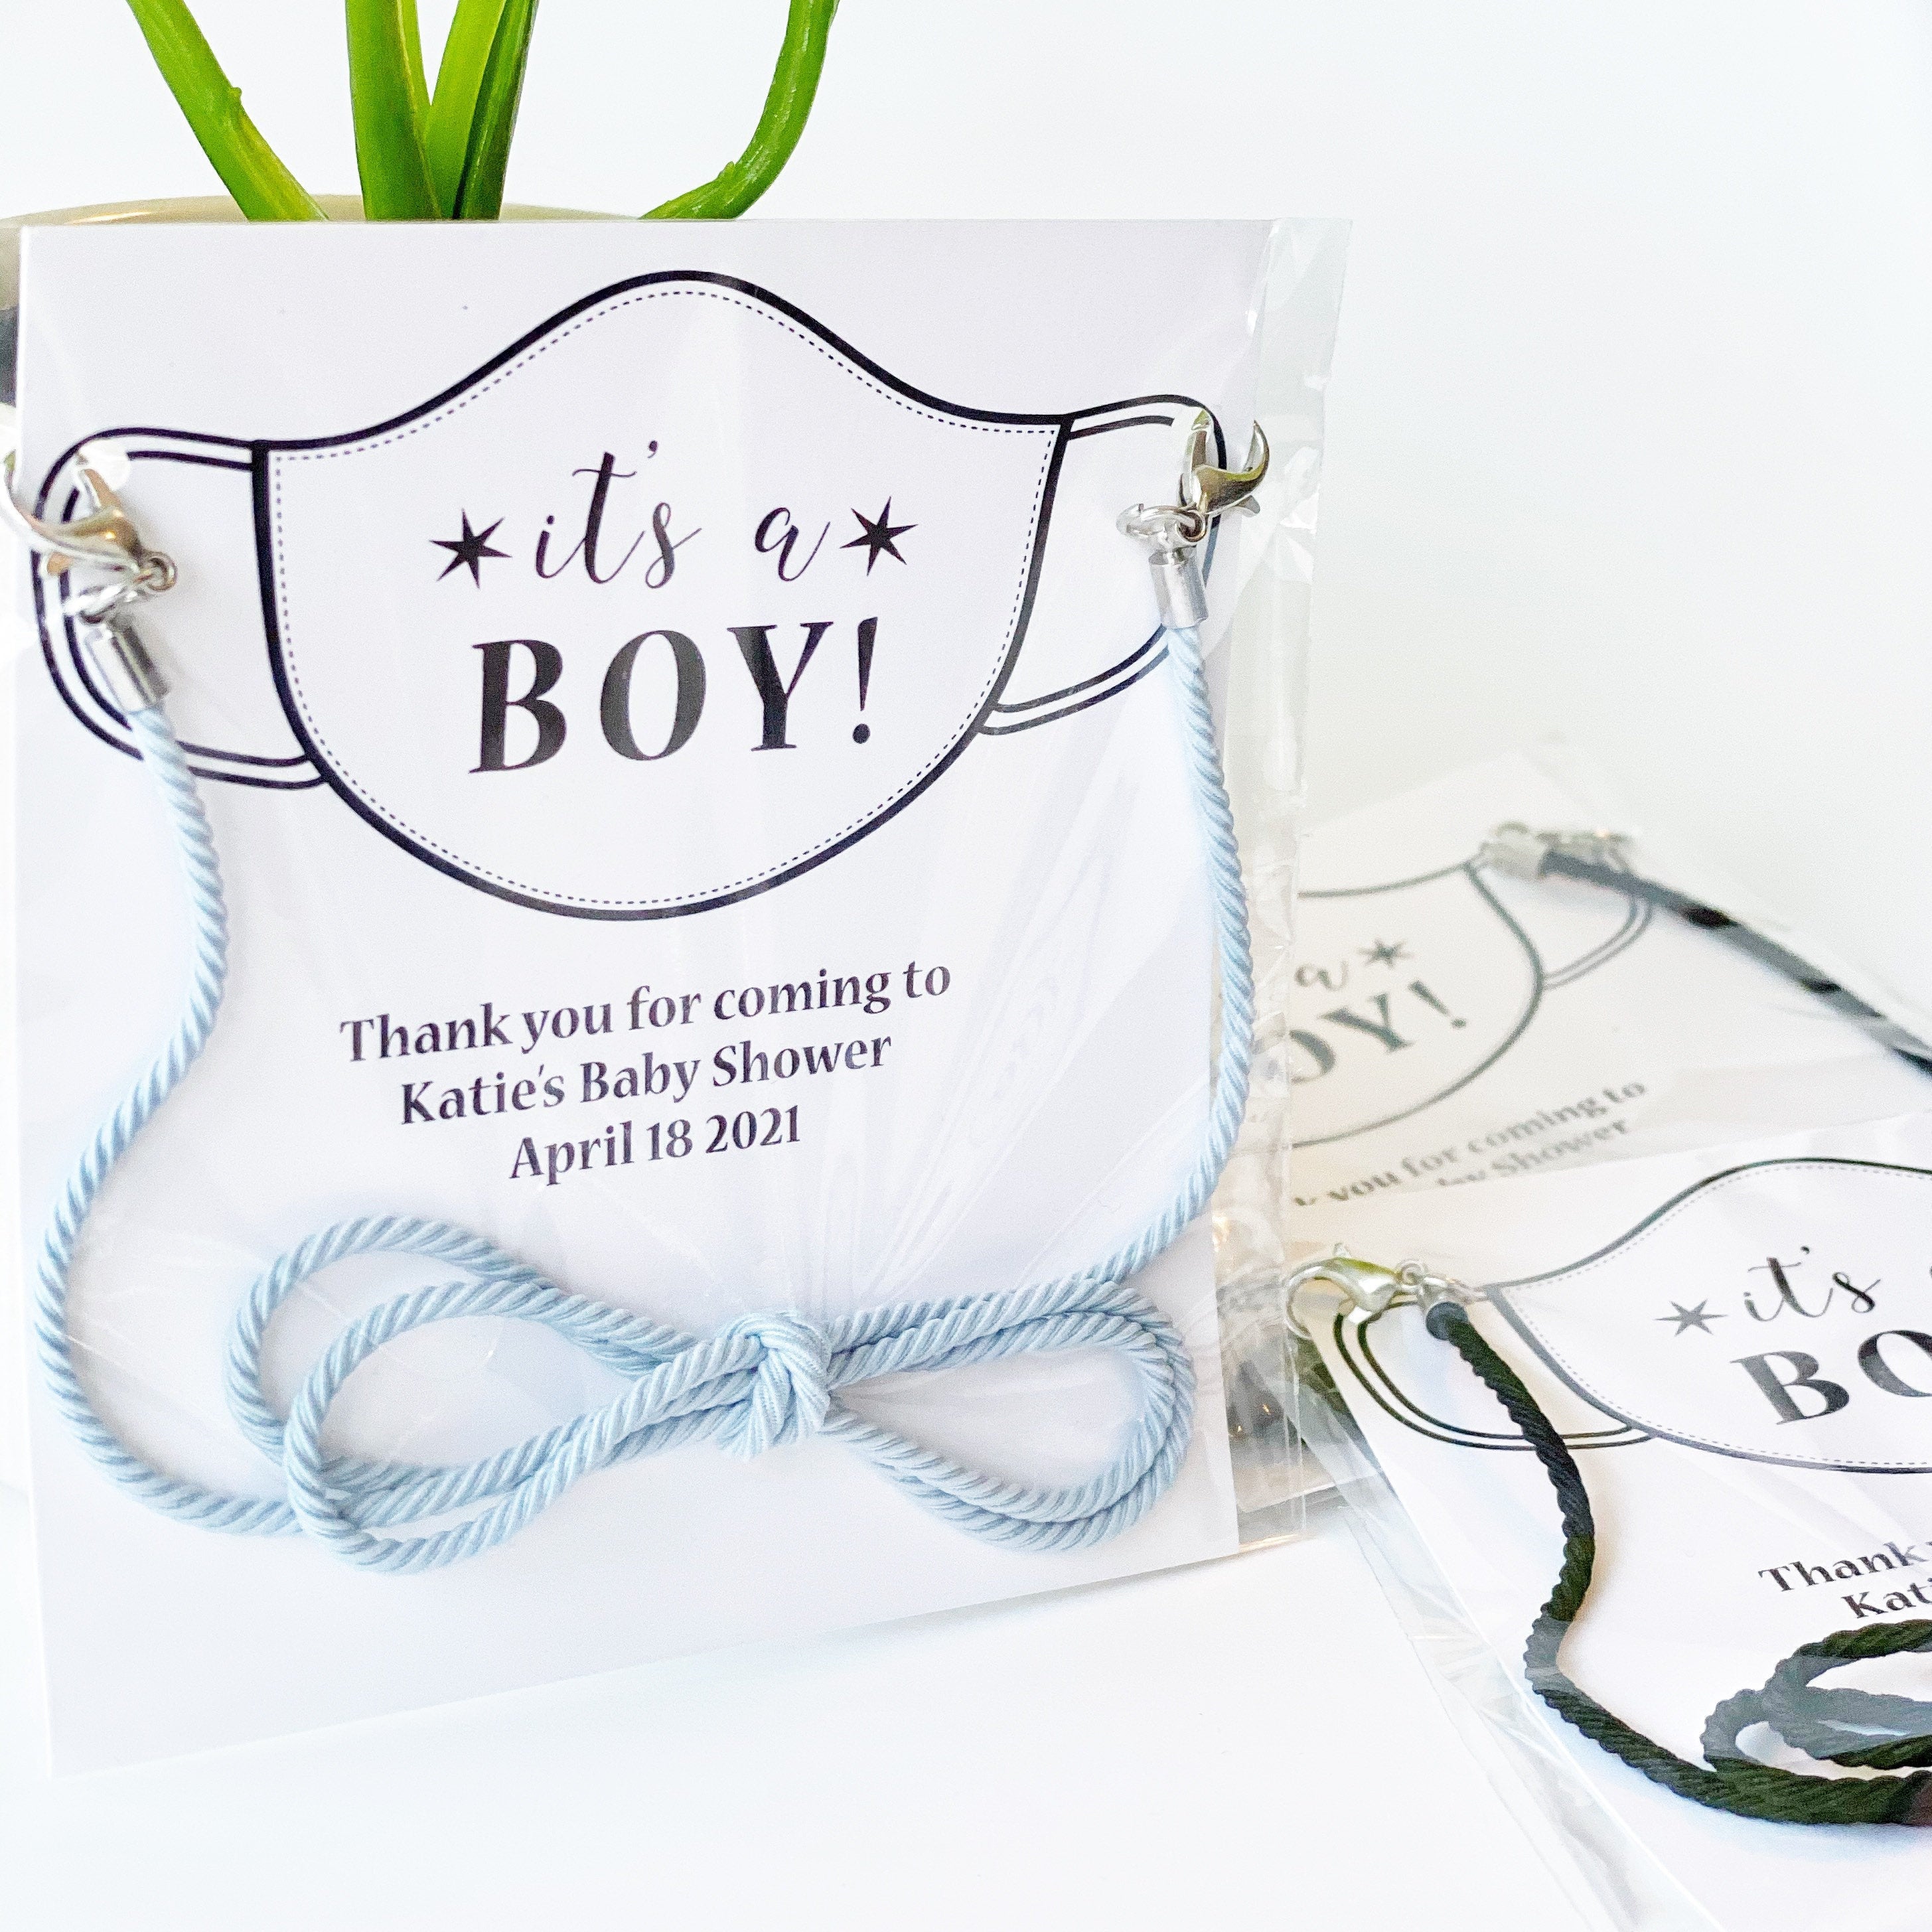 Mask Chain Baby Shower Favors Boy, Personalized Baby Shower Favors for Boys, Unique Baby Shower Favors, Baby Shower Party Favors